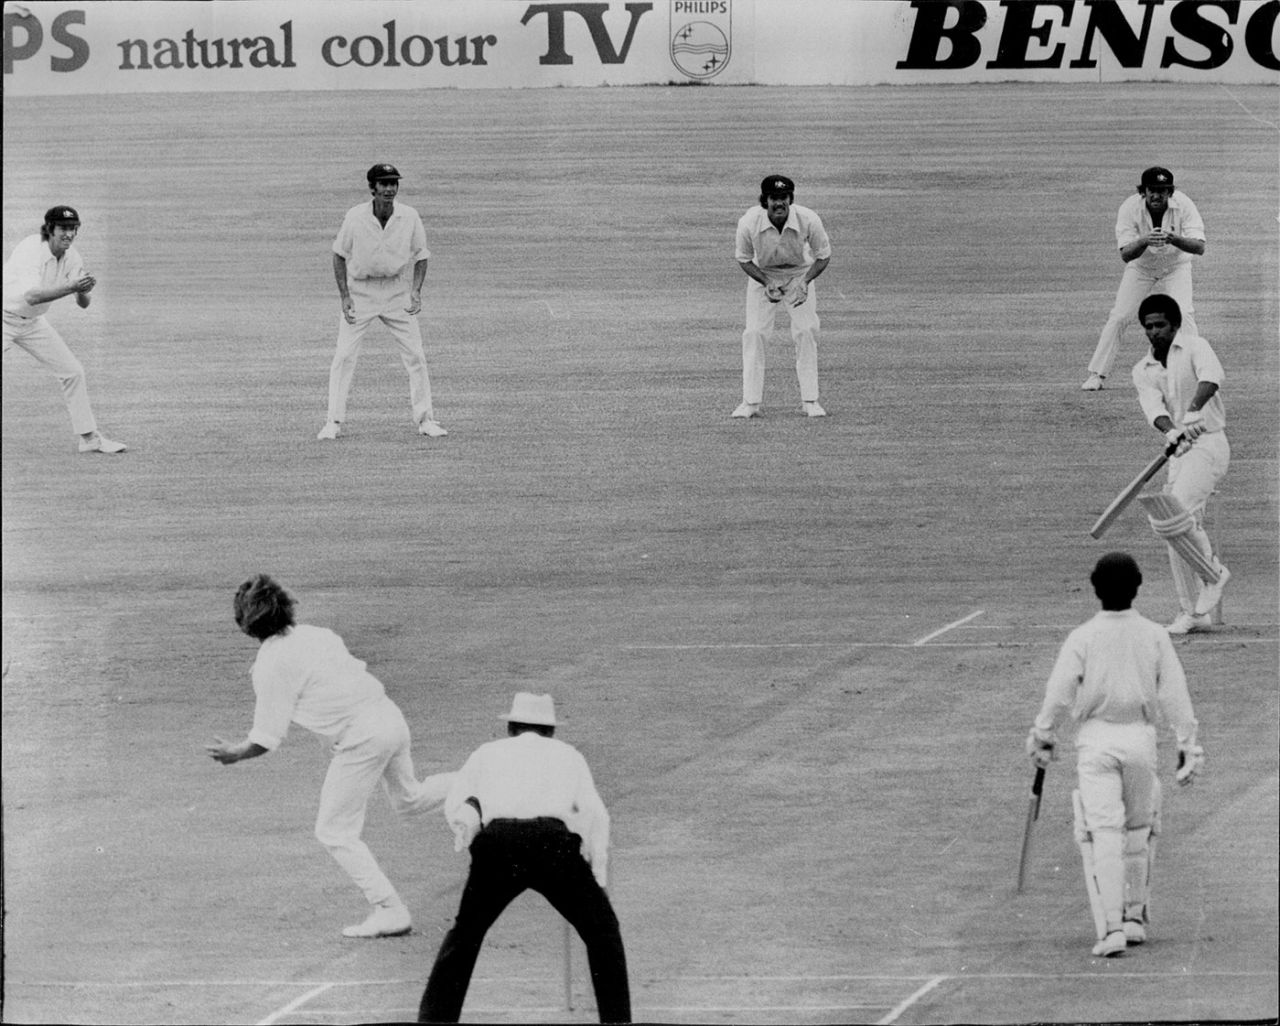 Bernard Julien tries to fend off a delivery from Jeff Thomson, 1975